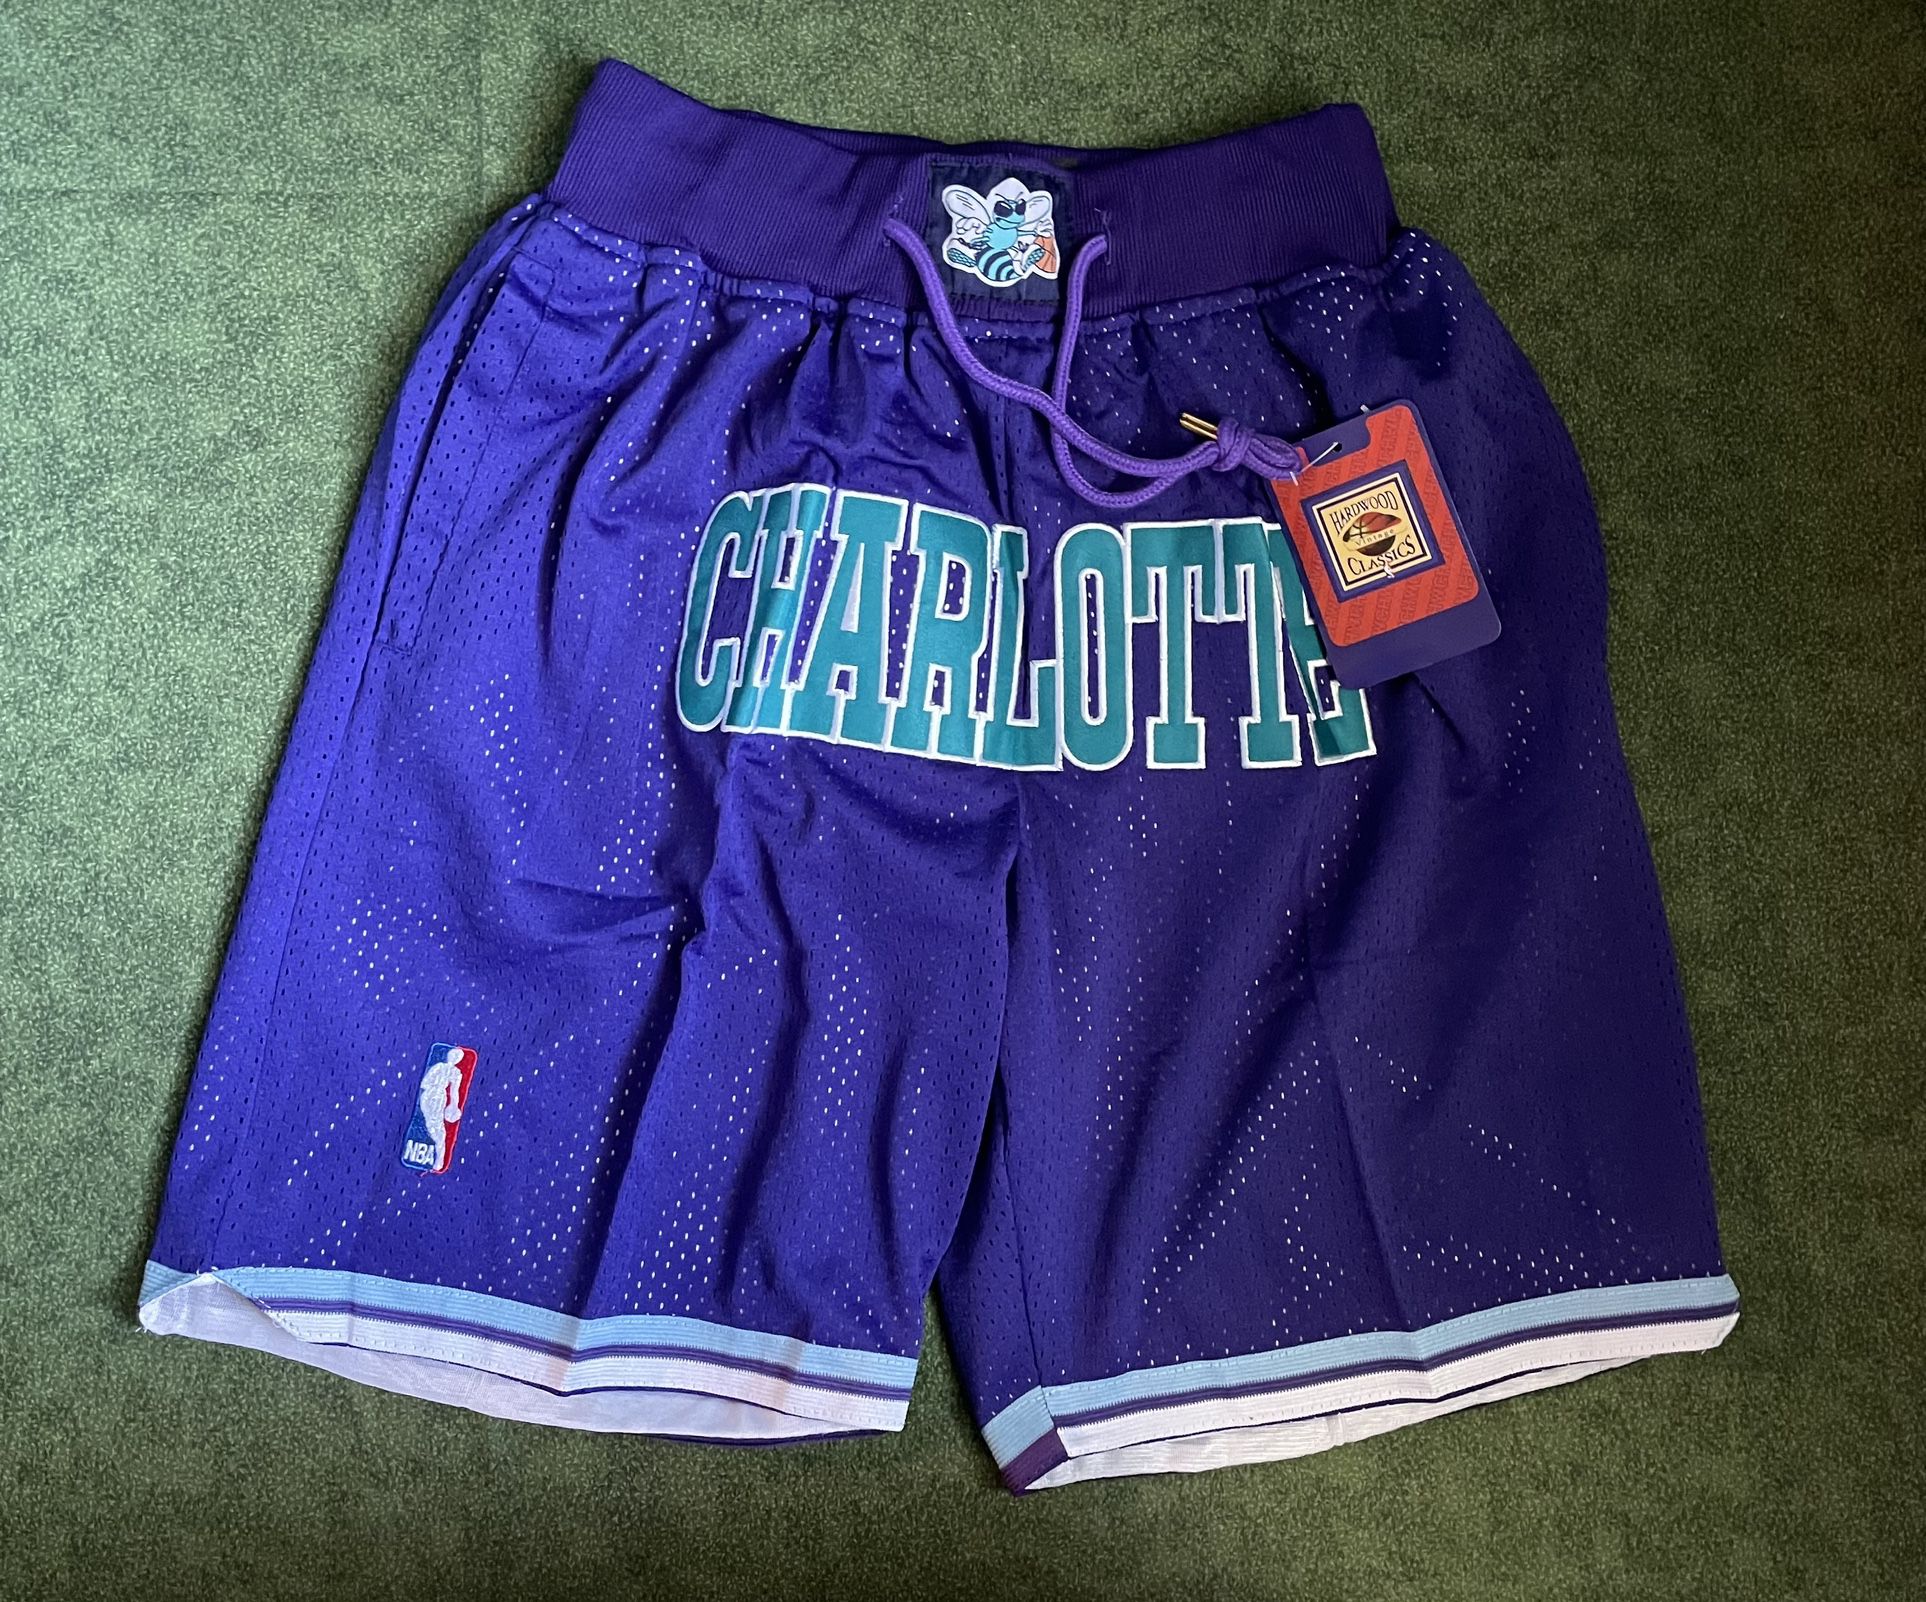 CHARLOTTE HORNETS JUST DON NBA BASKETBALL SHORTS BRAND NEW WITH TAGS SIZE MEDIUM 